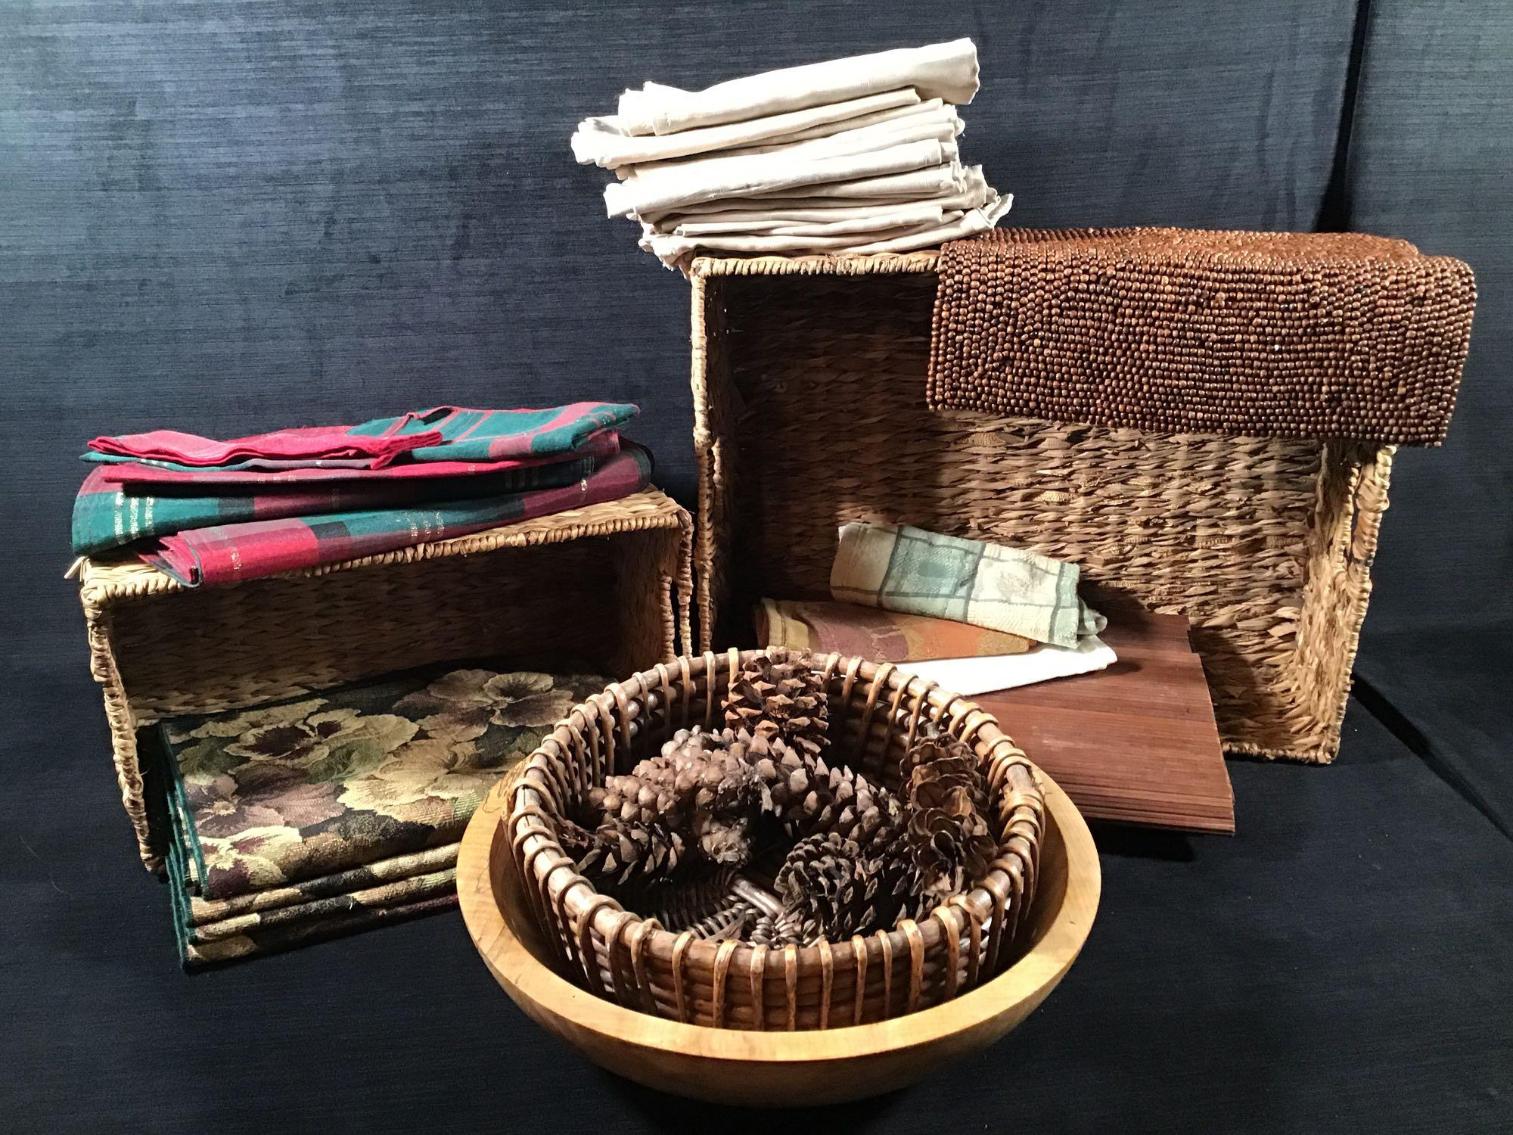 Image for Placemats, Napkins and Two Baskets